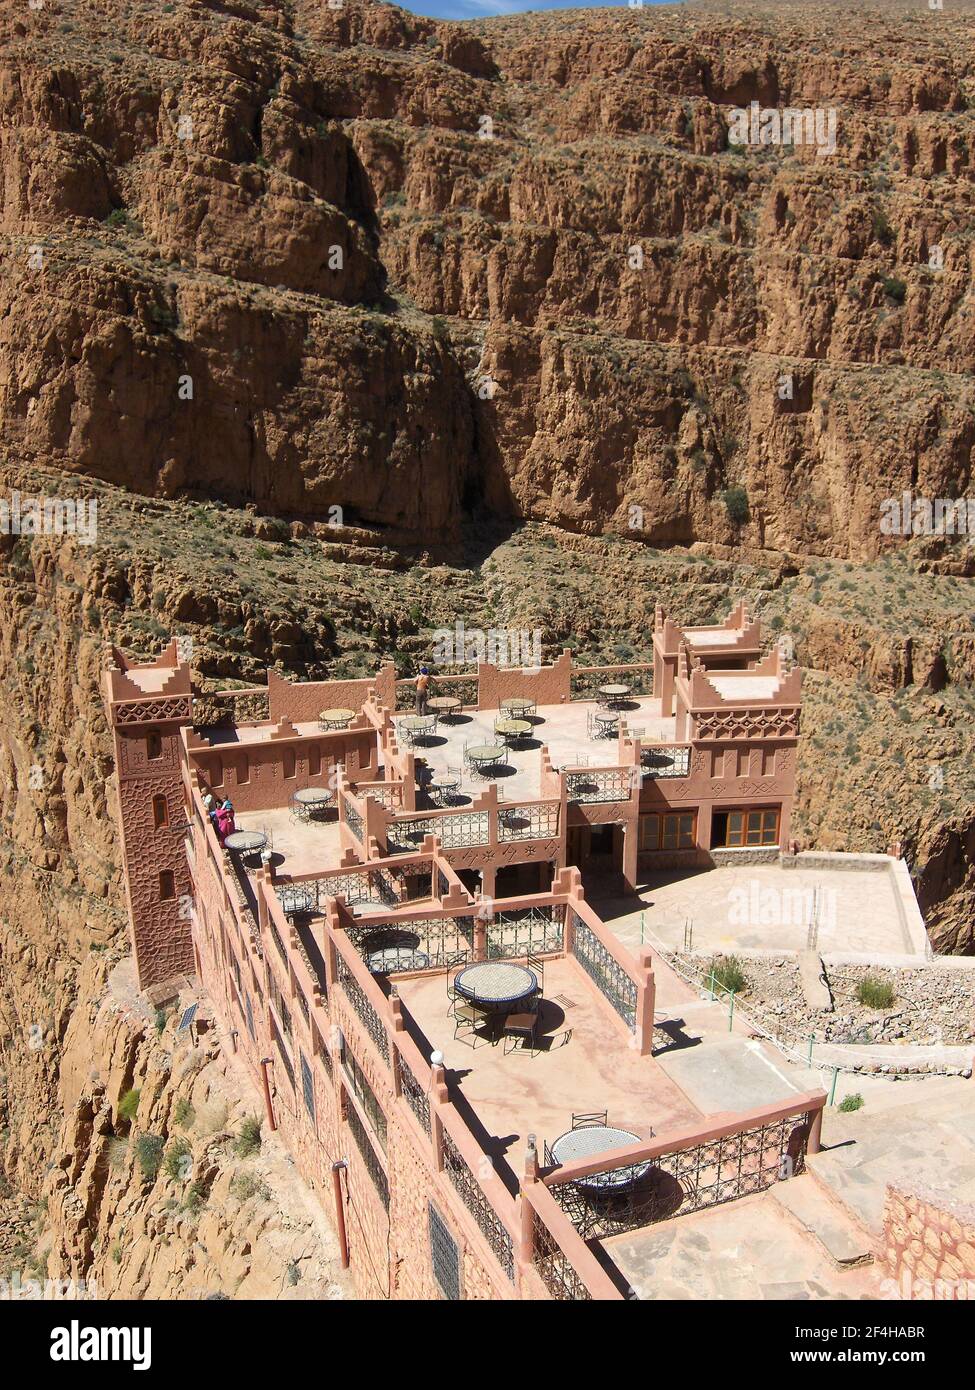 Traditional Moroccan architecture in the stunning Dades Gorge, Morocco Stock Photo